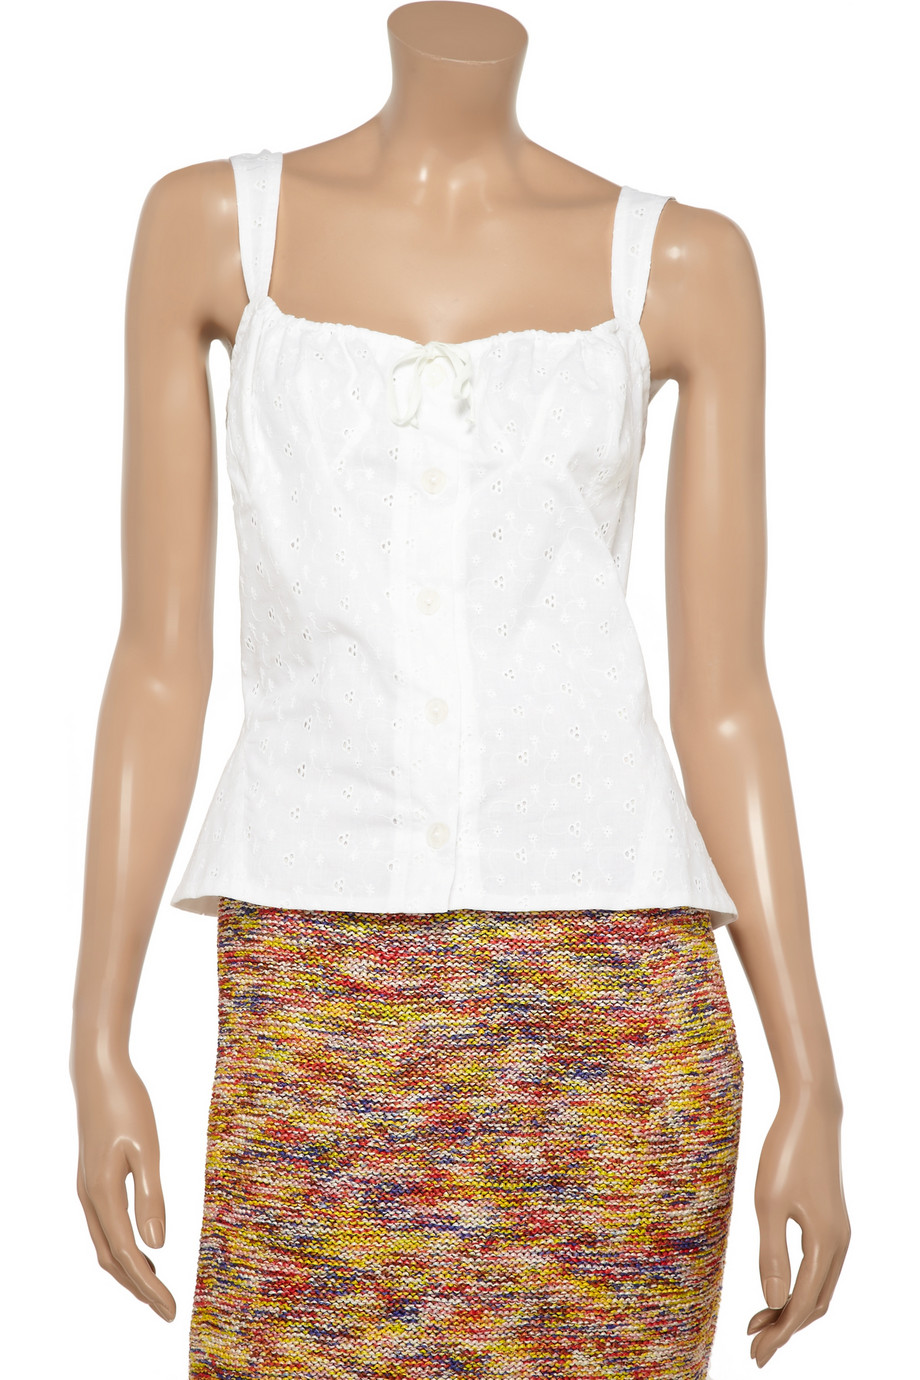 Vivienne Westwood Anglomania Libertine Cottoneyelet Top in White - Lyst